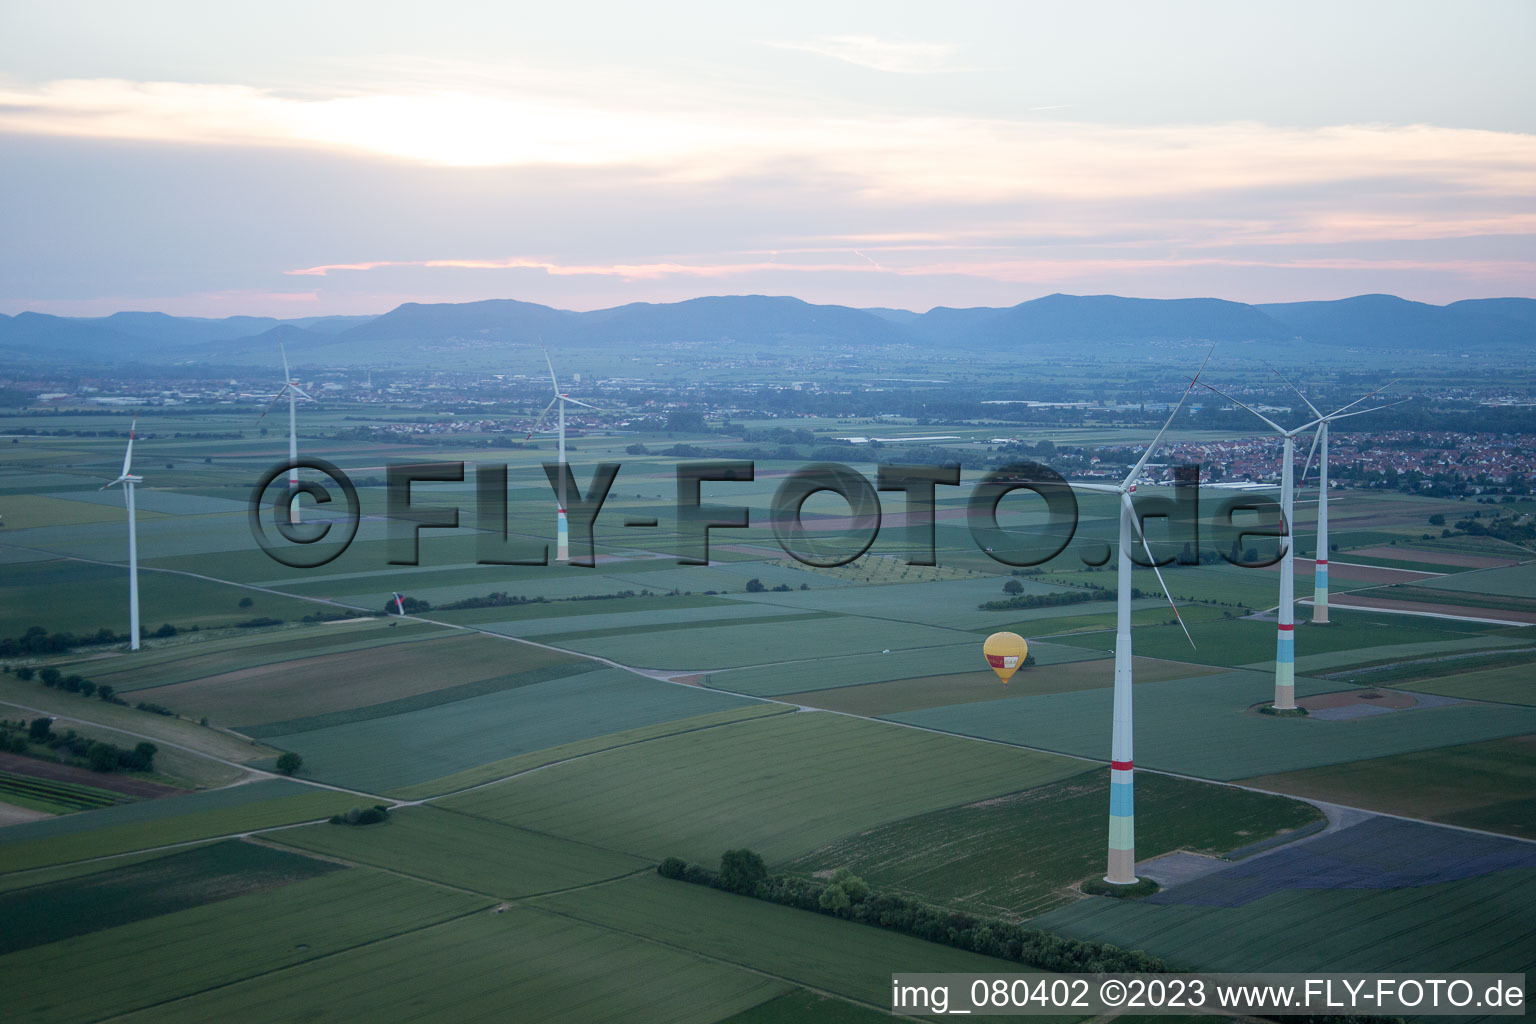 Hot air balloon between wind turbines in Offenbach an der Queich in the state Rhineland-Palatinate, Germany